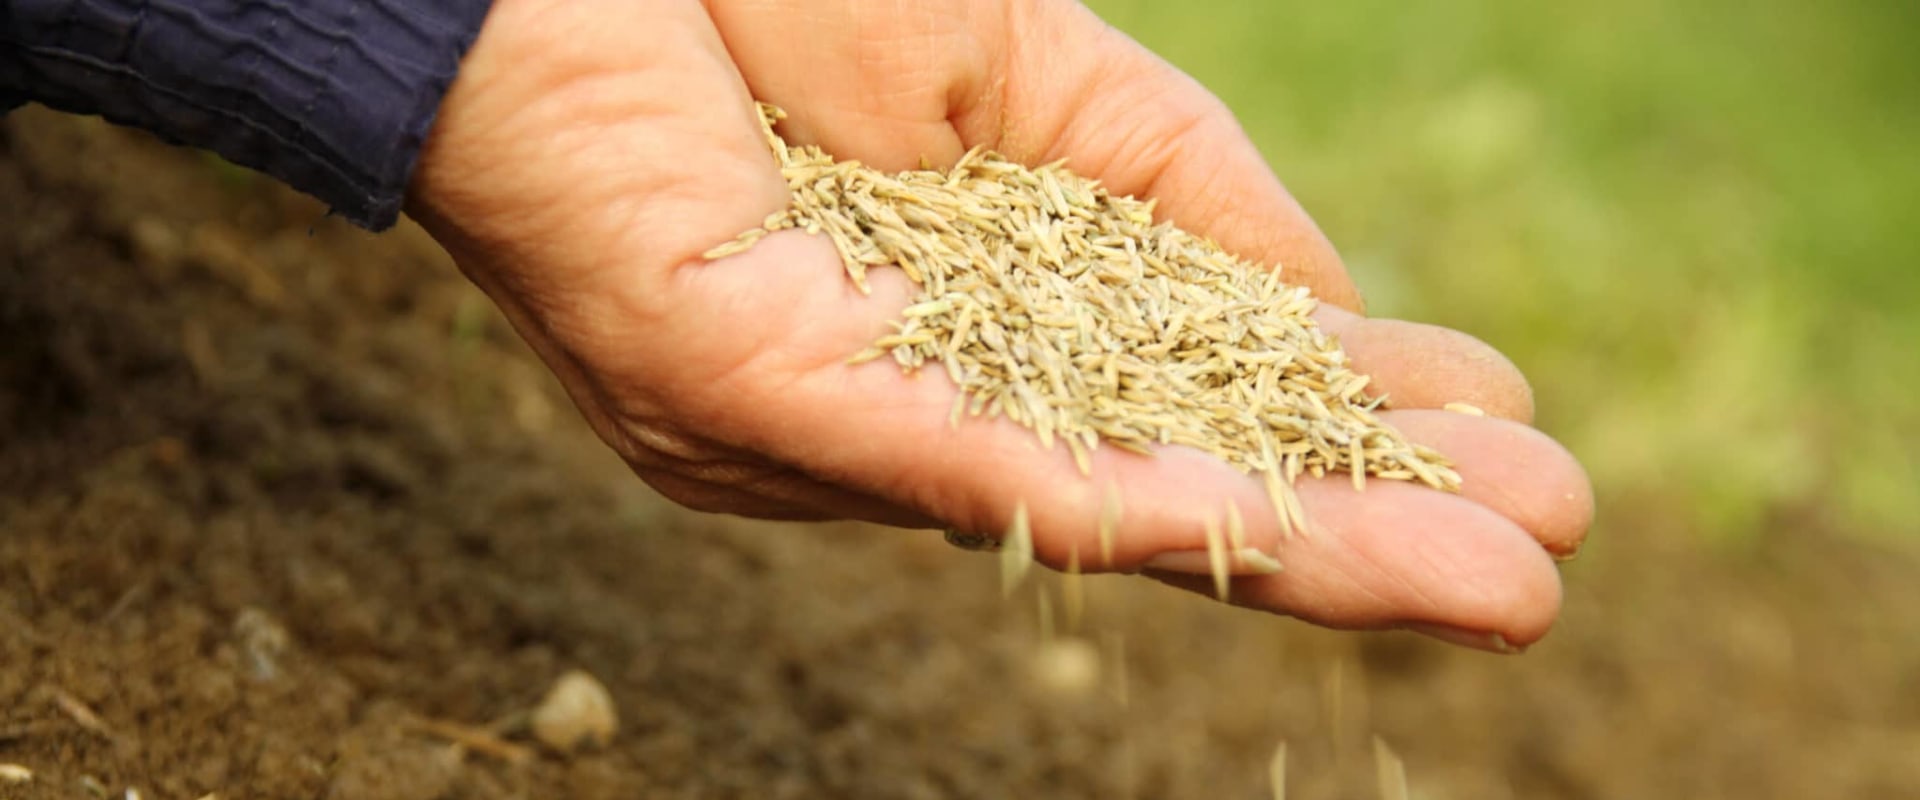 Is it better to plant grass seed in the spring or fall?